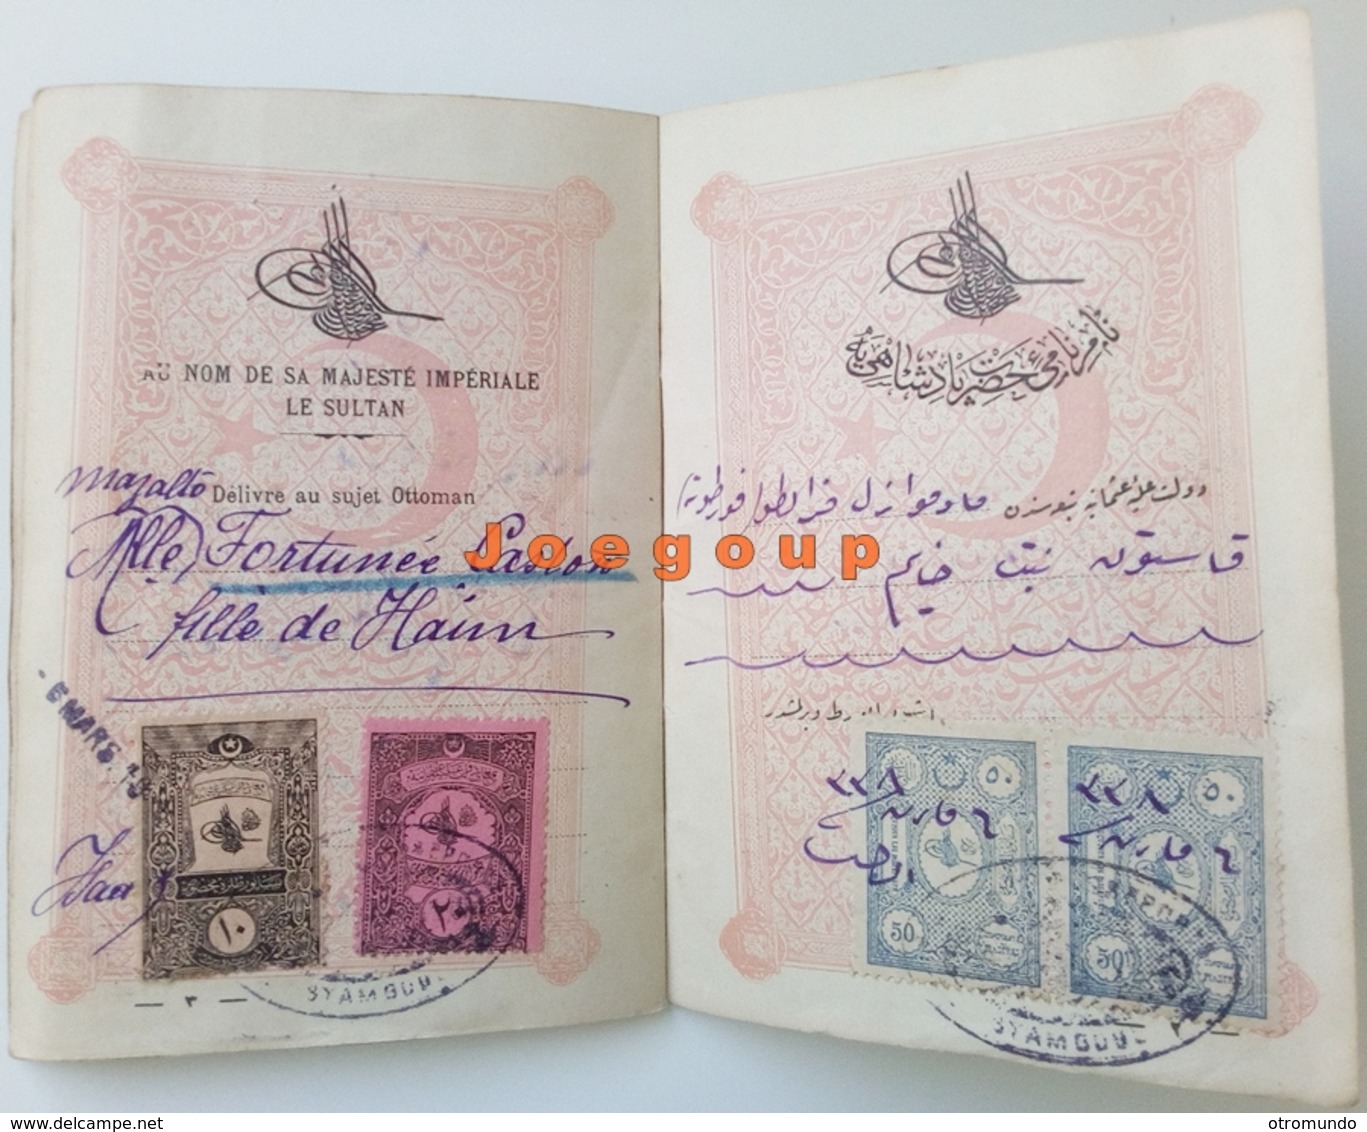 Passport Ottoman Empire Buenos Aires Argentina via Marsella France 1922 fiscal stamps